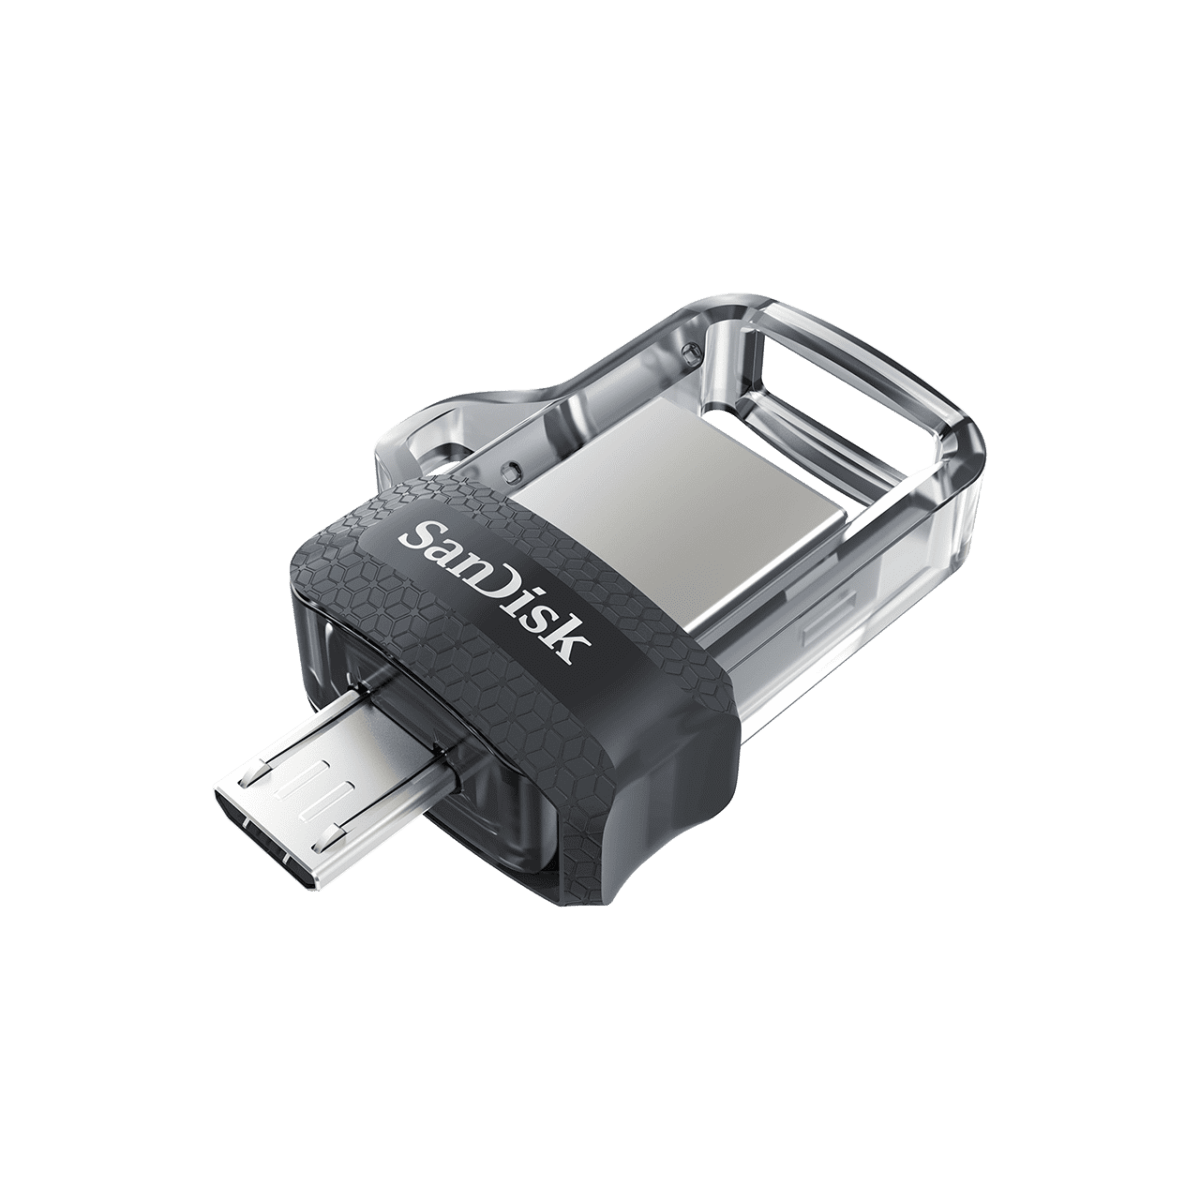 Ultra Dual Drive Usb M 3 Open Angled2.Png.thumb .1280.1280 Sandisk &Amp;Lt;Div Class=&Amp;Quot;Active&Amp;Quot; Data-Sku=&Amp;Quot;Sddd3-016G-A46&Amp;Quot;&Amp;Gt; &Amp;Lt;H1&Amp;Gt;Instantly Free Up Space On Your Android Smartphone&Amp;Lt;/H1&Amp;Gt; &Amp;Lt;Div Class=&Amp;Quot;Inheritpara Mb-4&Amp;Quot;&Amp;Gt; The Sandisk Ultra® Dual Drive M3.0 Makes It Easy To Transfer Content From Your Phone To Your Computer. With A Micro-Usb Connector On One End And A Usb 3.0 Connector On The Other, The Drive Lets You Move Content Easily Between Your Devices—From Your Android™ Smartphone Or Tablet To Your Laptop, Pc Or Mac Computer&Amp;Lt;A Class=&Amp;Quot;Disclosure&Amp;Quot; Href=&Amp;Quot;Https://Shop.westerndigital.com/Products/Usb-Flash-Drives/Sandisk-Ultra-Dual-Drive-M30-Usb-3-0-Micro-Usb#Disclosures&Amp;Quot; Target=&Amp;Quot;_Self&Amp;Quot; Rel=&Amp;Quot;Noopener Noreferrer&Amp;Quot; Aria-Labelledby=&Amp;Quot;Disclosures&Amp;Quot;&Amp;Gt;&Amp;Lt;Sup&Amp;Gt;1&Amp;Lt;/Sup&Amp;Gt;&Amp;Lt;/A&Amp;Gt;. The Usb 3.0 Connector Is High-Performance And Backward-Compatible With Usb 2.0 Ports. The Sandisk® Memory Zone App&Amp;Lt;A Class=&Amp;Quot;Disclosure&Amp;Quot; Href=&Amp;Quot;Https://Shop.westerndigital.com/Products/Usb-Flash-Drives/Sandisk-Ultra-Dual-Drive-M30-Usb-3-0-Micro-Usb#Disclosures&Amp;Quot; Target=&Amp;Quot;_Self&Amp;Quot; Rel=&Amp;Quot;Noopener Noreferrer&Amp;Quot; Aria-Labelledby=&Amp;Quot;Disclosures&Amp;Quot;&Amp;Gt;&Amp;Lt;Sup&Amp;Gt;2&Amp;Lt;/Sup&Amp;Gt;&Amp;Lt;/A&Amp;Gt; For Android (Available On Google Play) Helps You Manage Your Device’s Memory And Your Content. &Amp;Lt;Strong&Amp;Gt;Warranty&Amp;Lt;/Strong&Amp;Gt; The Sandisk Ultra Flair Usb 3.0 Flash Drive Is Backed By A Five-Year Manufacturer Warranty&Amp;Lt;A Class=&Amp;Quot;Disclosure&Amp;Quot; Href=&Amp;Quot;Https://Shop.westerndigital.com/Products/Usb-Flash-Drives/Sandisk-Ultra-Flair-Usb-3-0#Disclosures&Amp;Quot; Target=&Amp;Quot;_Self&Amp;Quot; Rel=&Amp;Quot;Noopener Noreferrer&Amp;Quot; Aria-Labelledby=&Amp;Quot;Disclosures&Amp;Quot;&Amp;Gt;&Amp;Lt;Sup&Amp;Gt;2&Amp;Lt;/Sup&Amp;Gt;&Amp;Lt;/A&Amp;Gt; &Amp;Lt;/Div&Amp;Gt; &Amp;Lt;/Div&Amp;Gt; Sandisk Ultra Dual Drive M3.0 Flash Drive For Android Smartphones (64Gb)